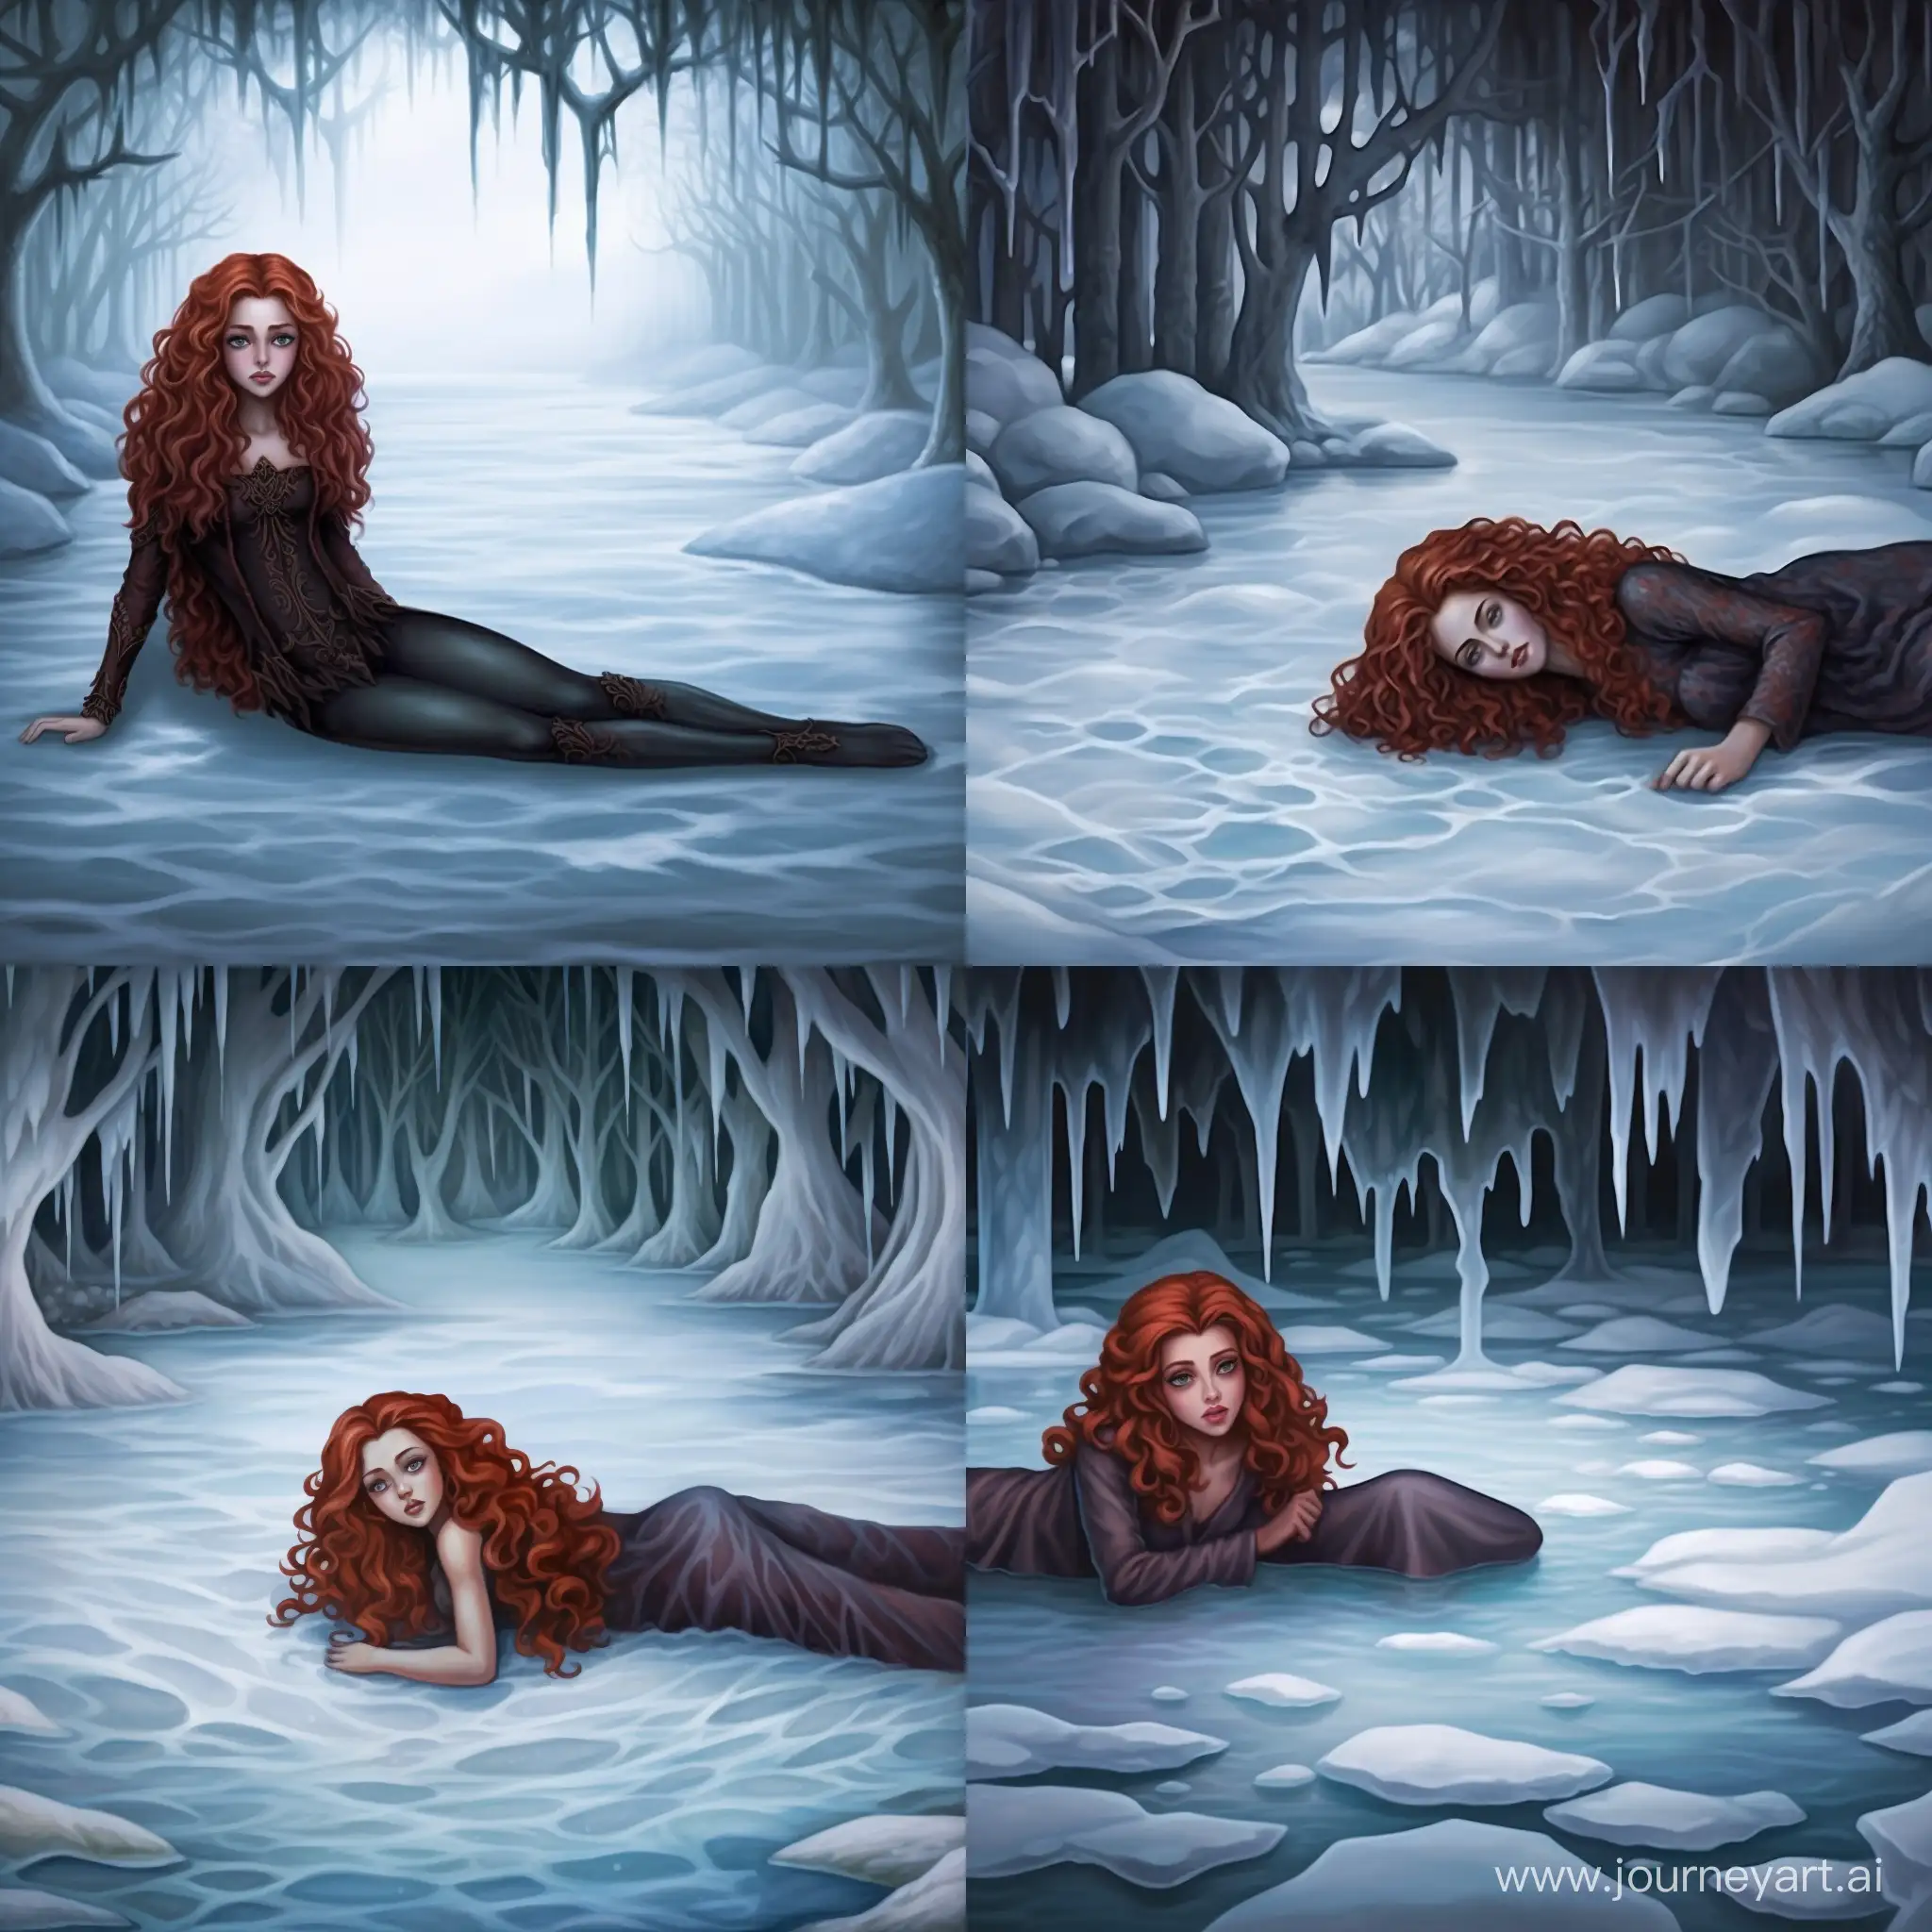 Unconscious-Curly-RedHaired-Girl-in-Winter-Ice-Floes